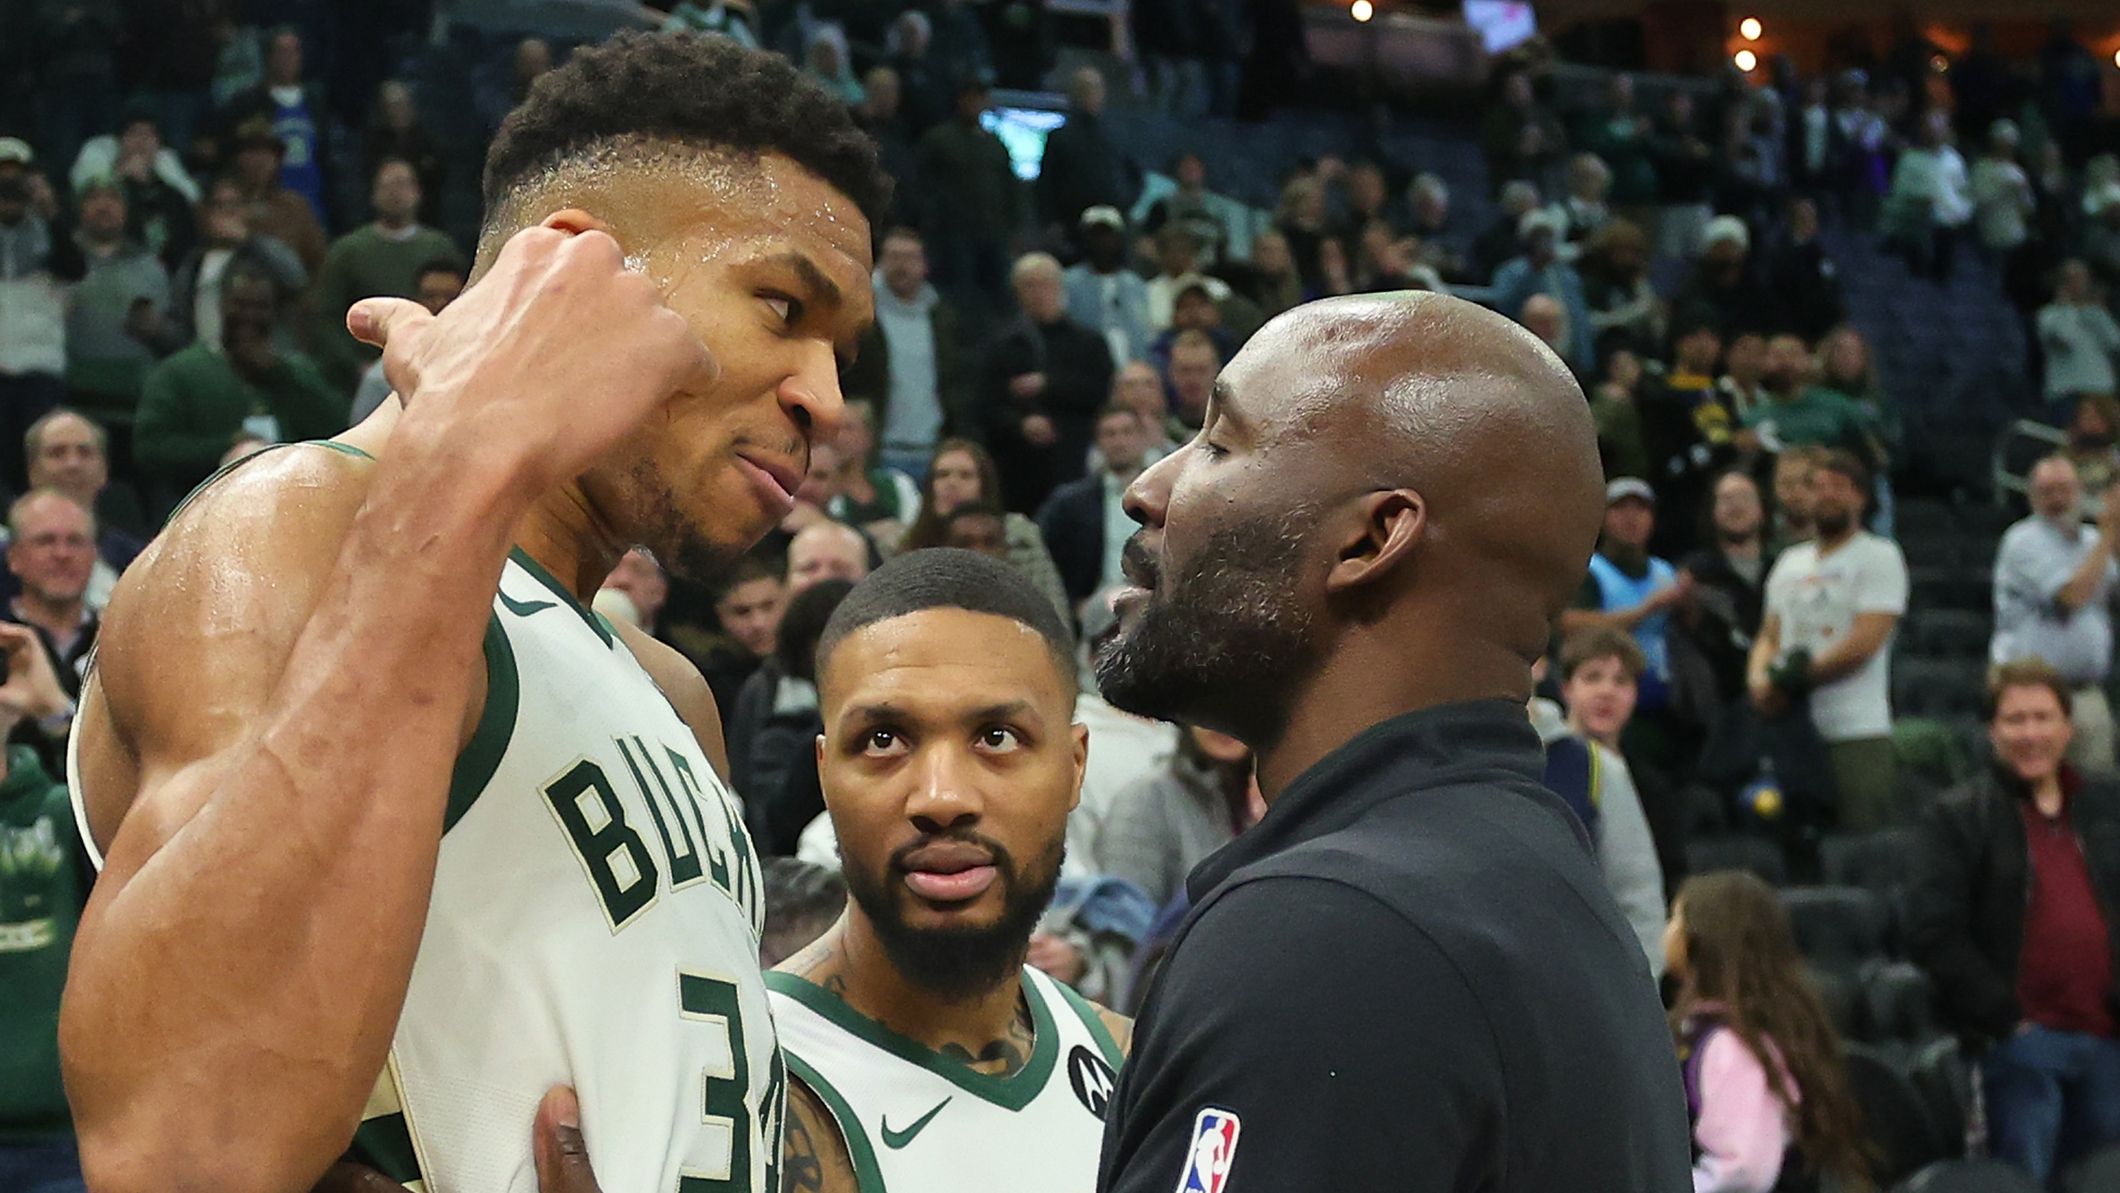 Giannis Antetokounmpo exchanges words with Tyrese Haliburton of the Indiana Pacers.